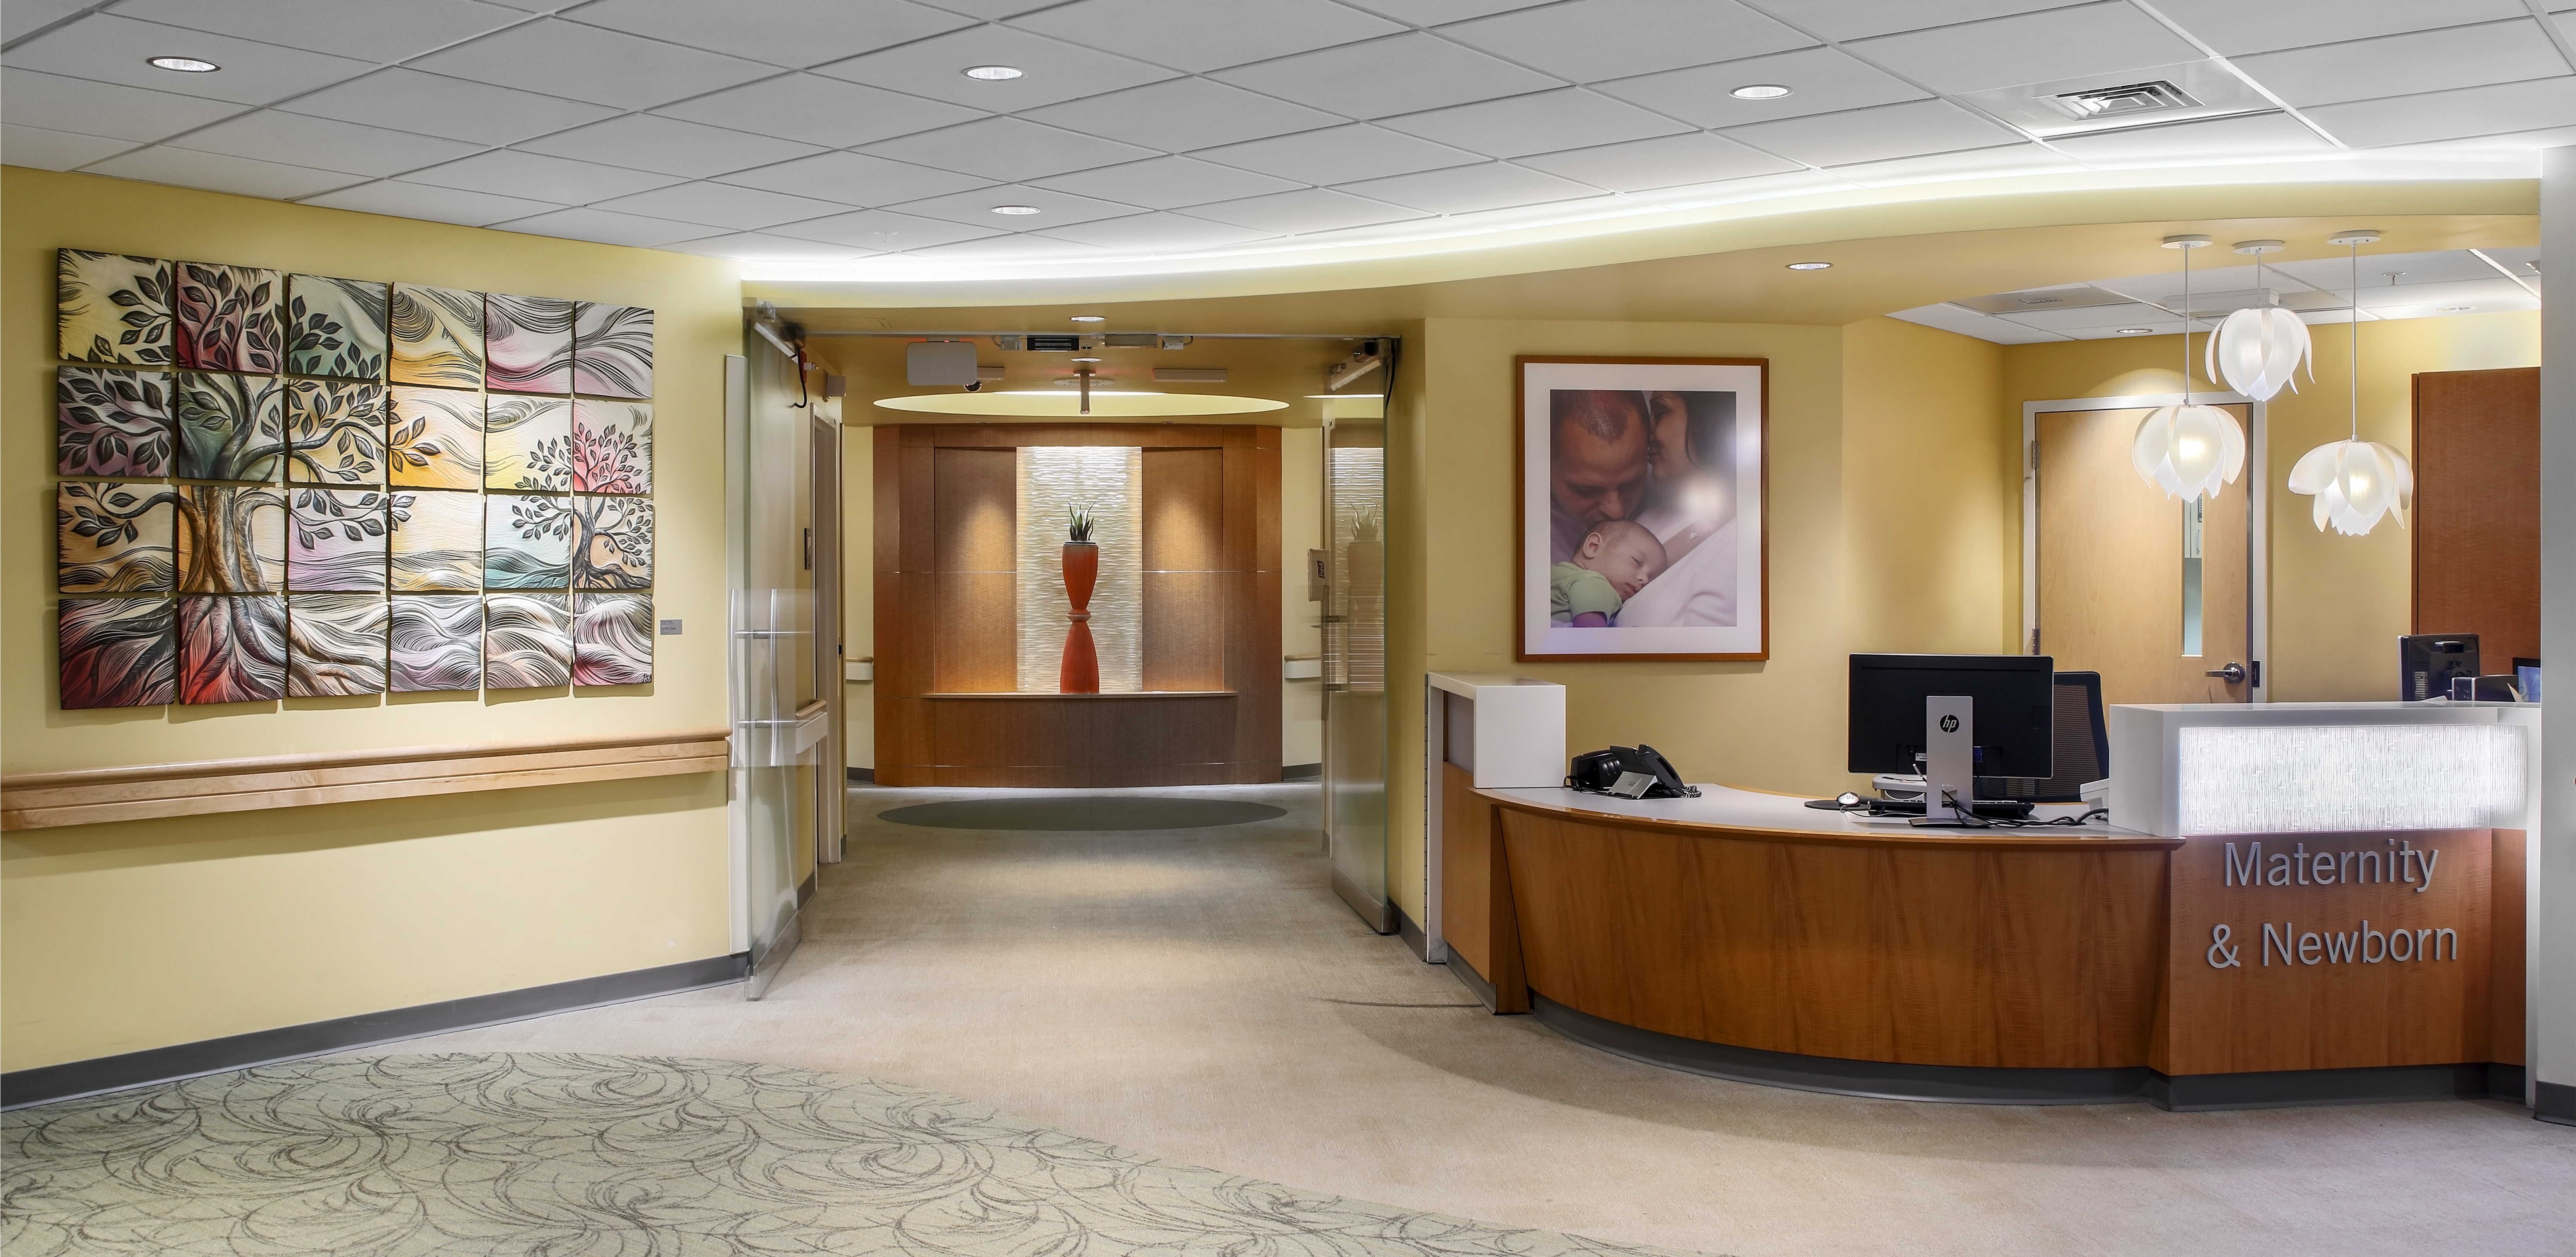 Yale New Haven Hospital – Neonatal Intensive Care Unit and Maternity Services Renovation